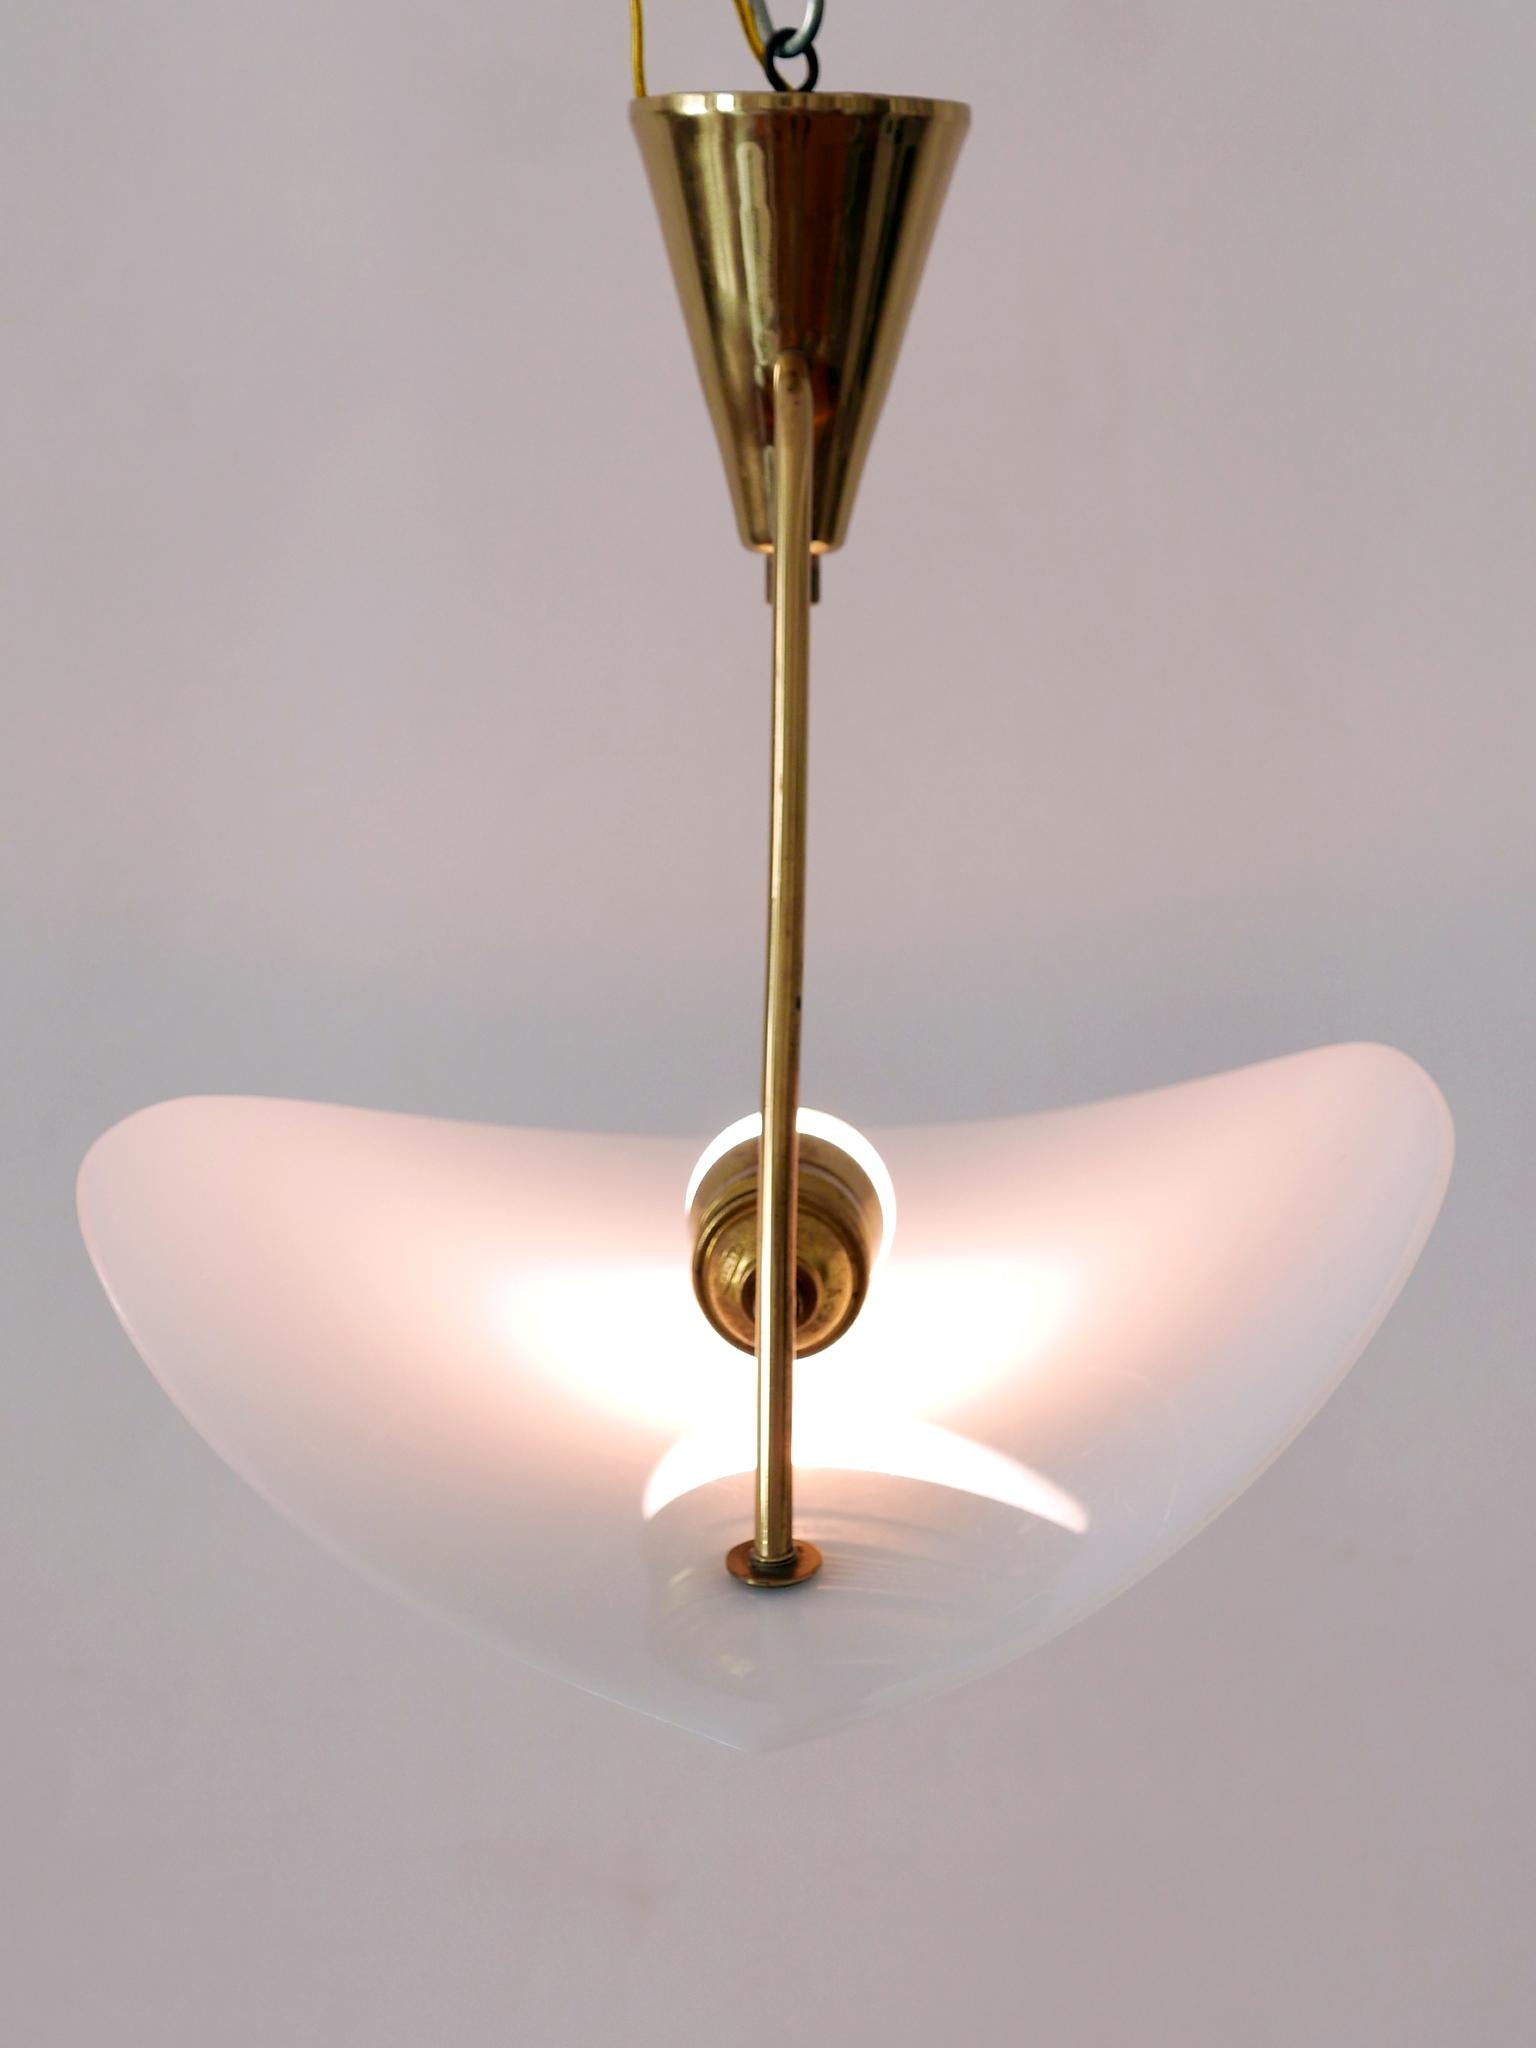 Extremely Rare and Elegant Lucite & Brass Ceiling Lamp Germany 1960s For Sale 7